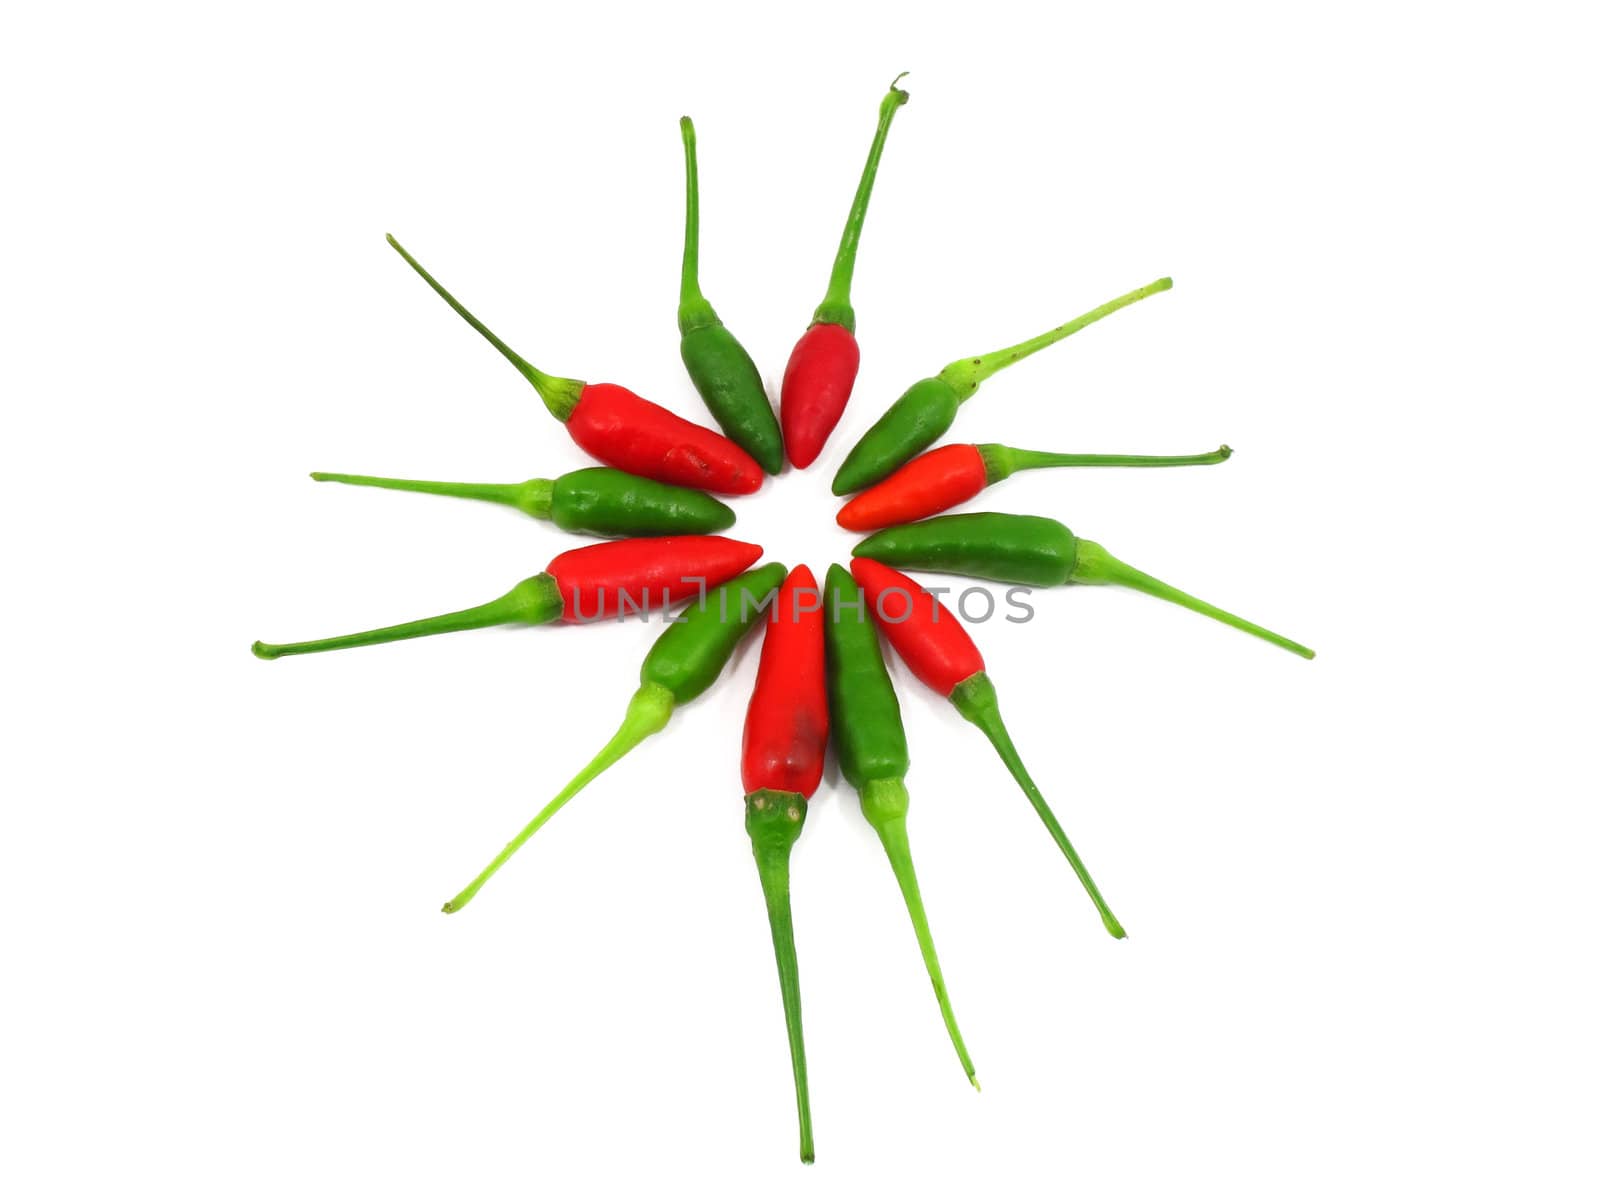 Red and green chilli peppers alternate in circle